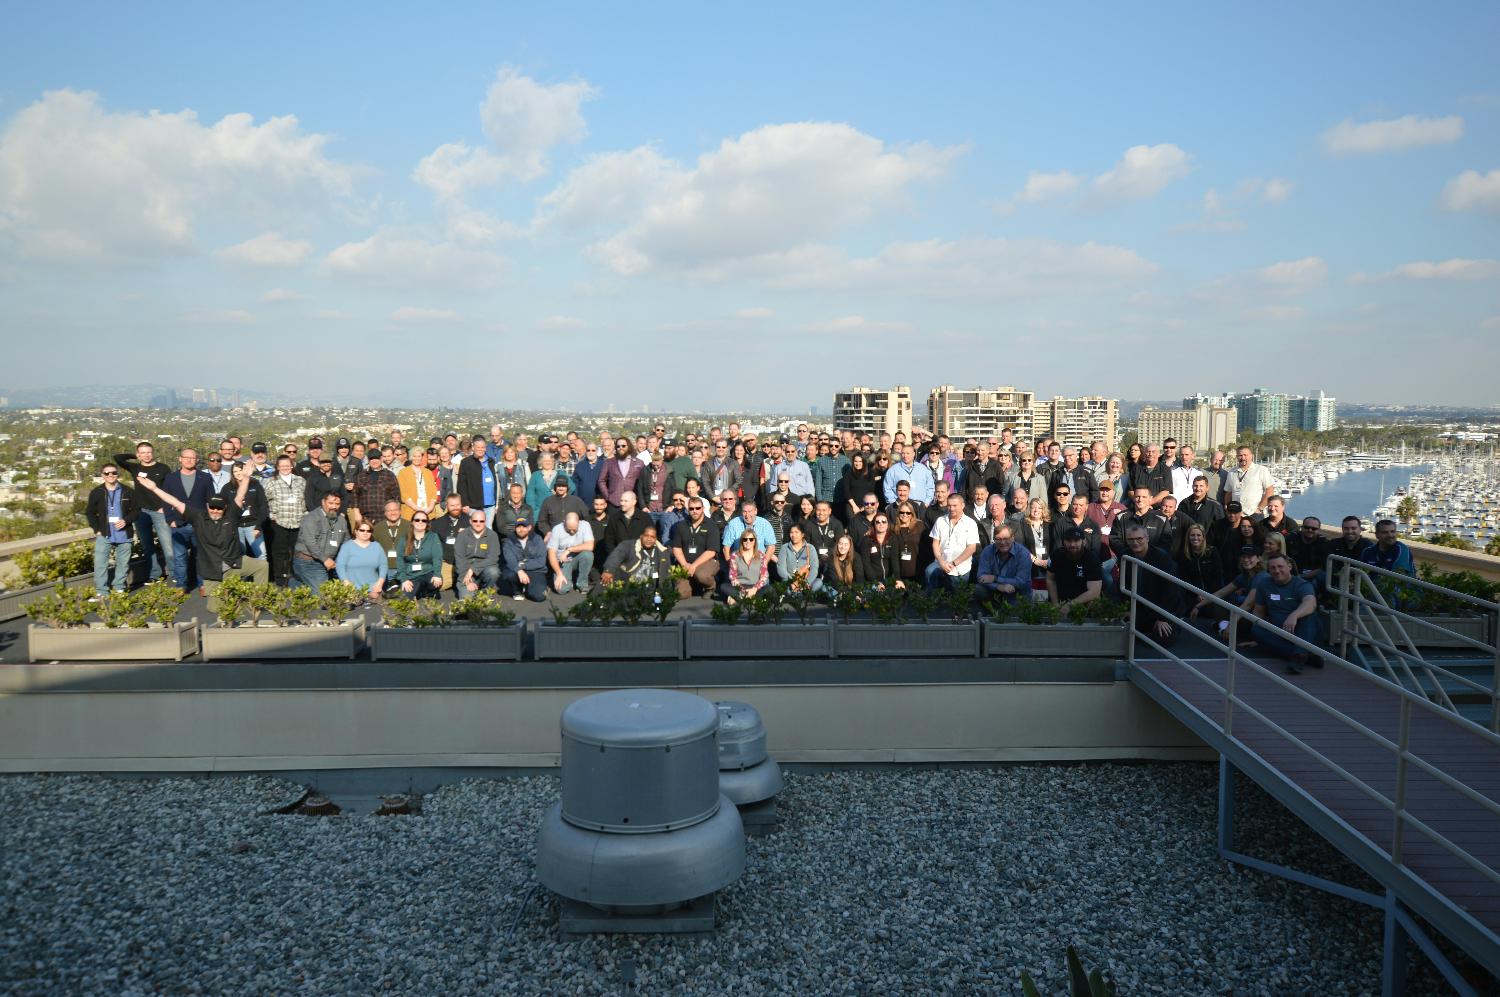 Staff and clients enjoying an amazing few days together at our Digital Shop Conference in sunny Southern California.